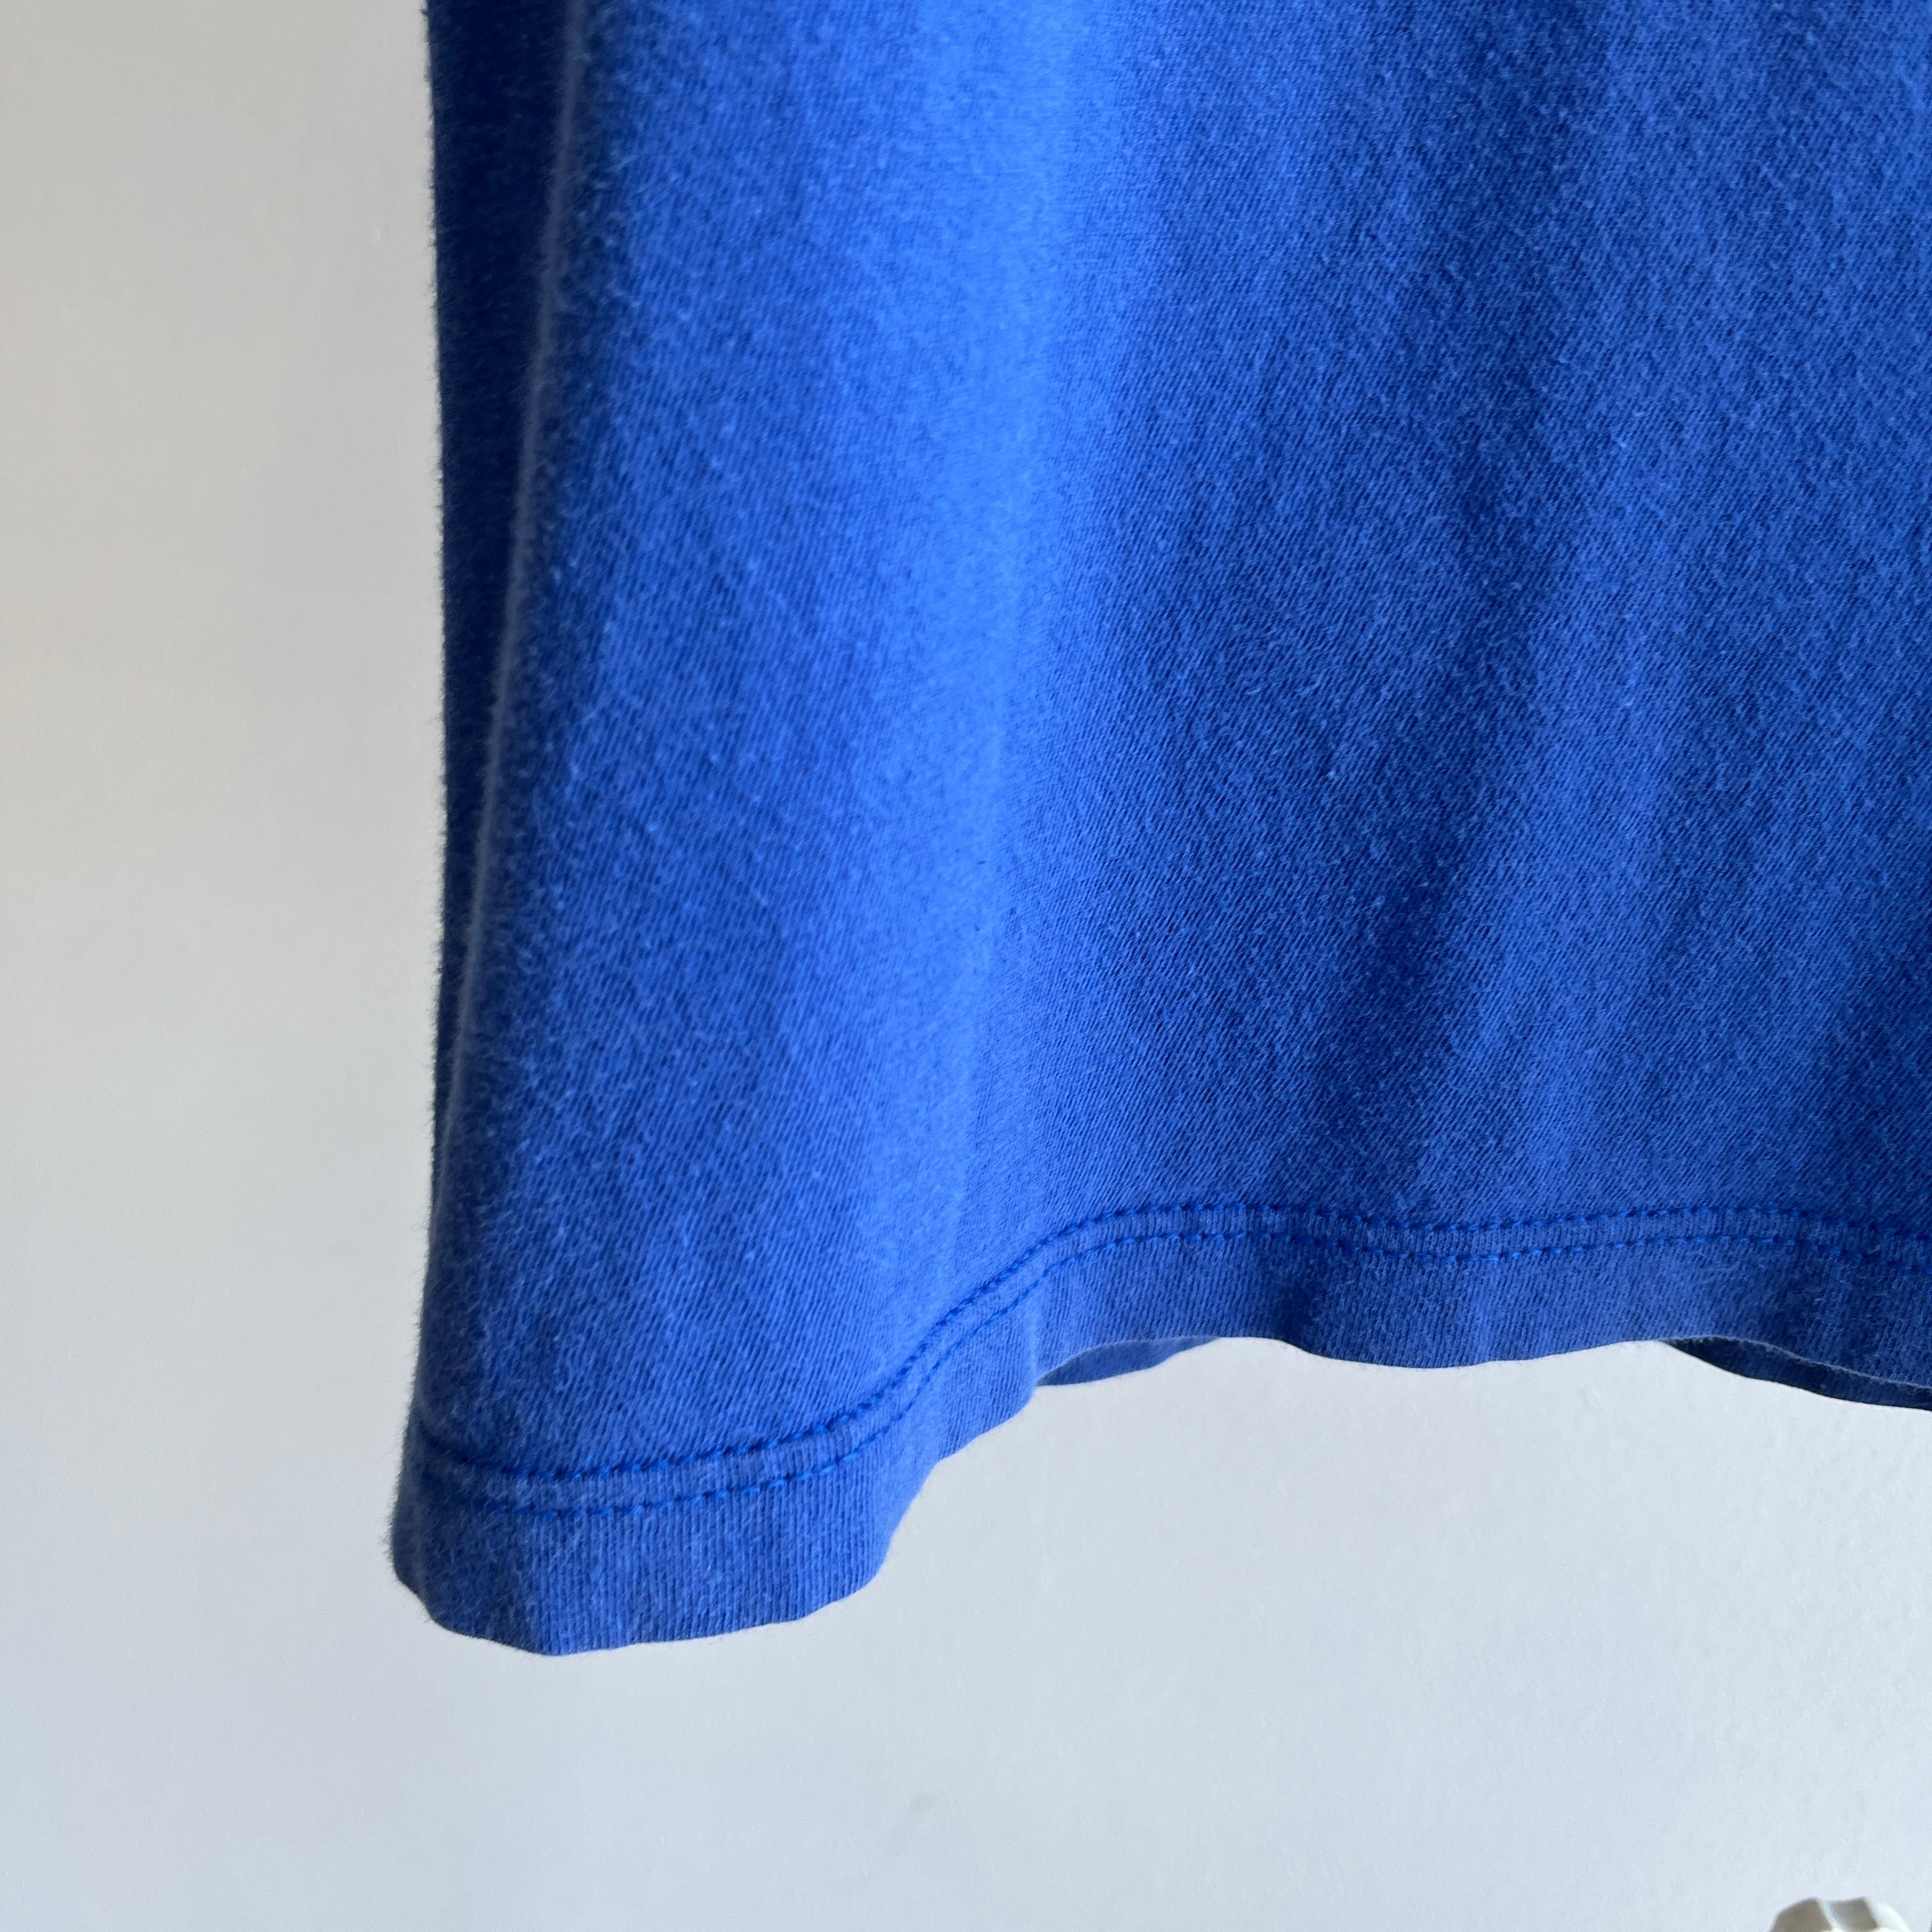 1990s USA Made Calvin Klein Dodger Blue Soft and Slouchy T-Shirt